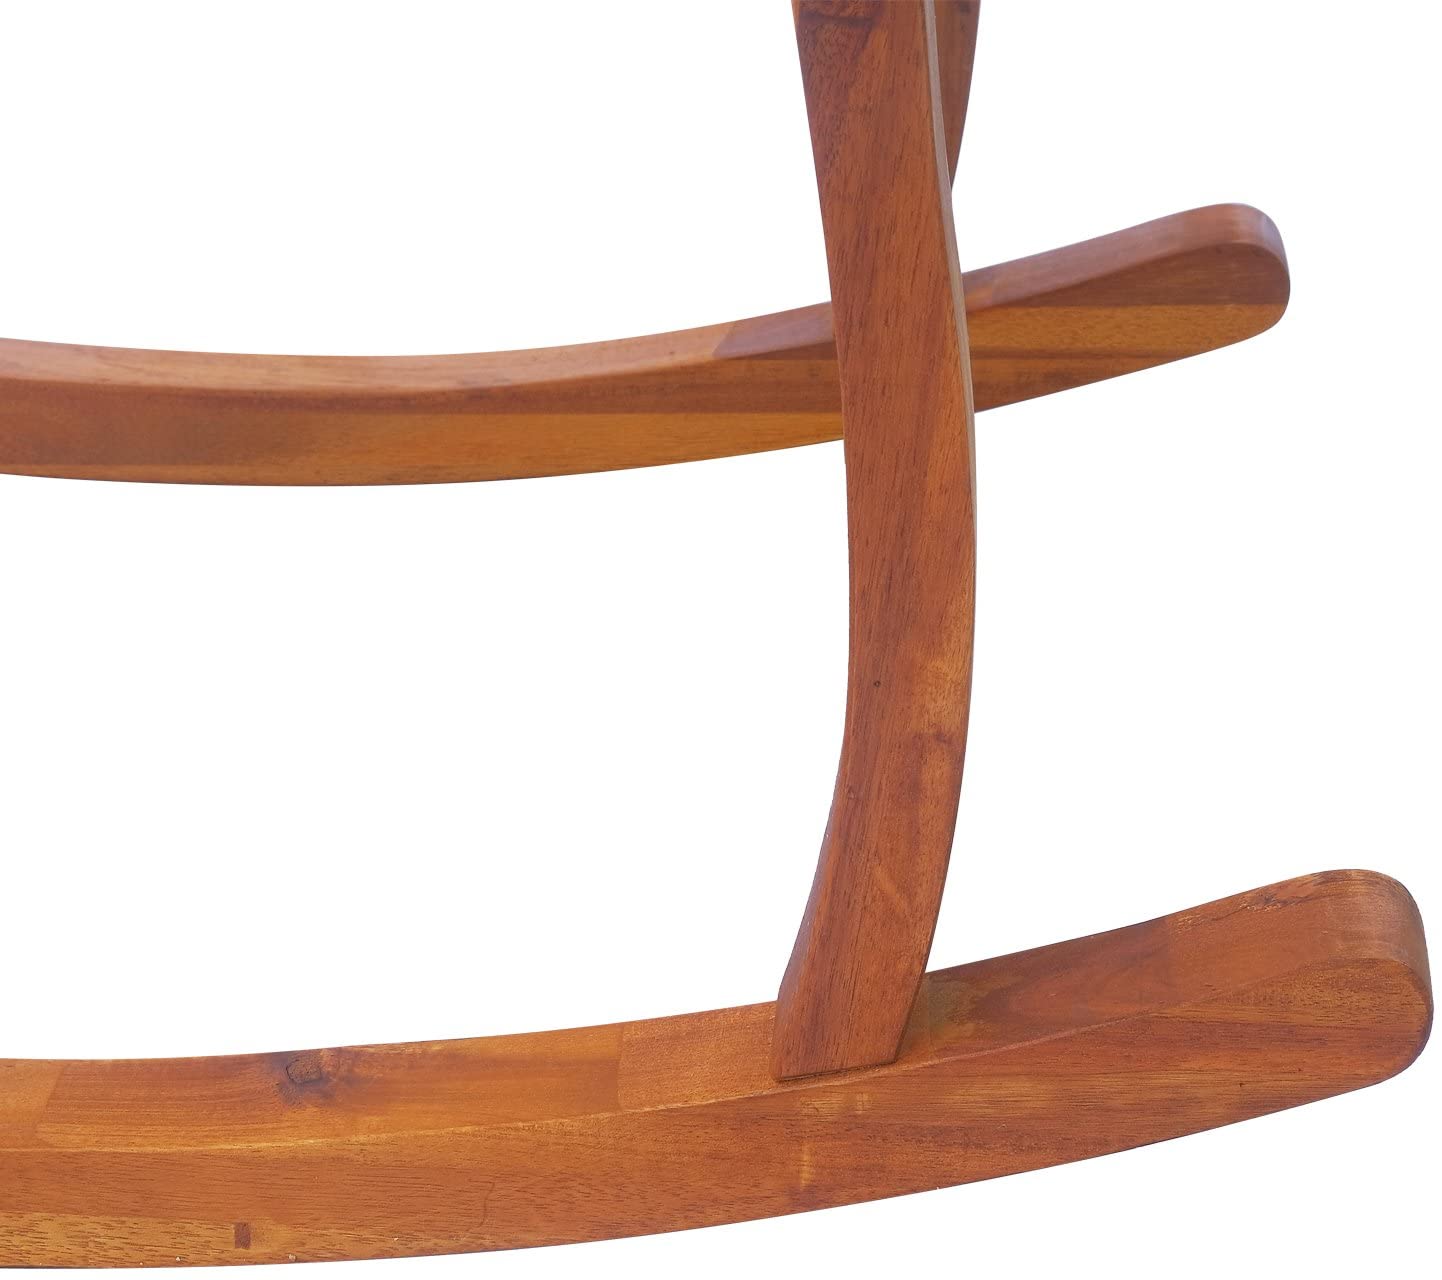 Wooden Rocking Chair with Cushioned